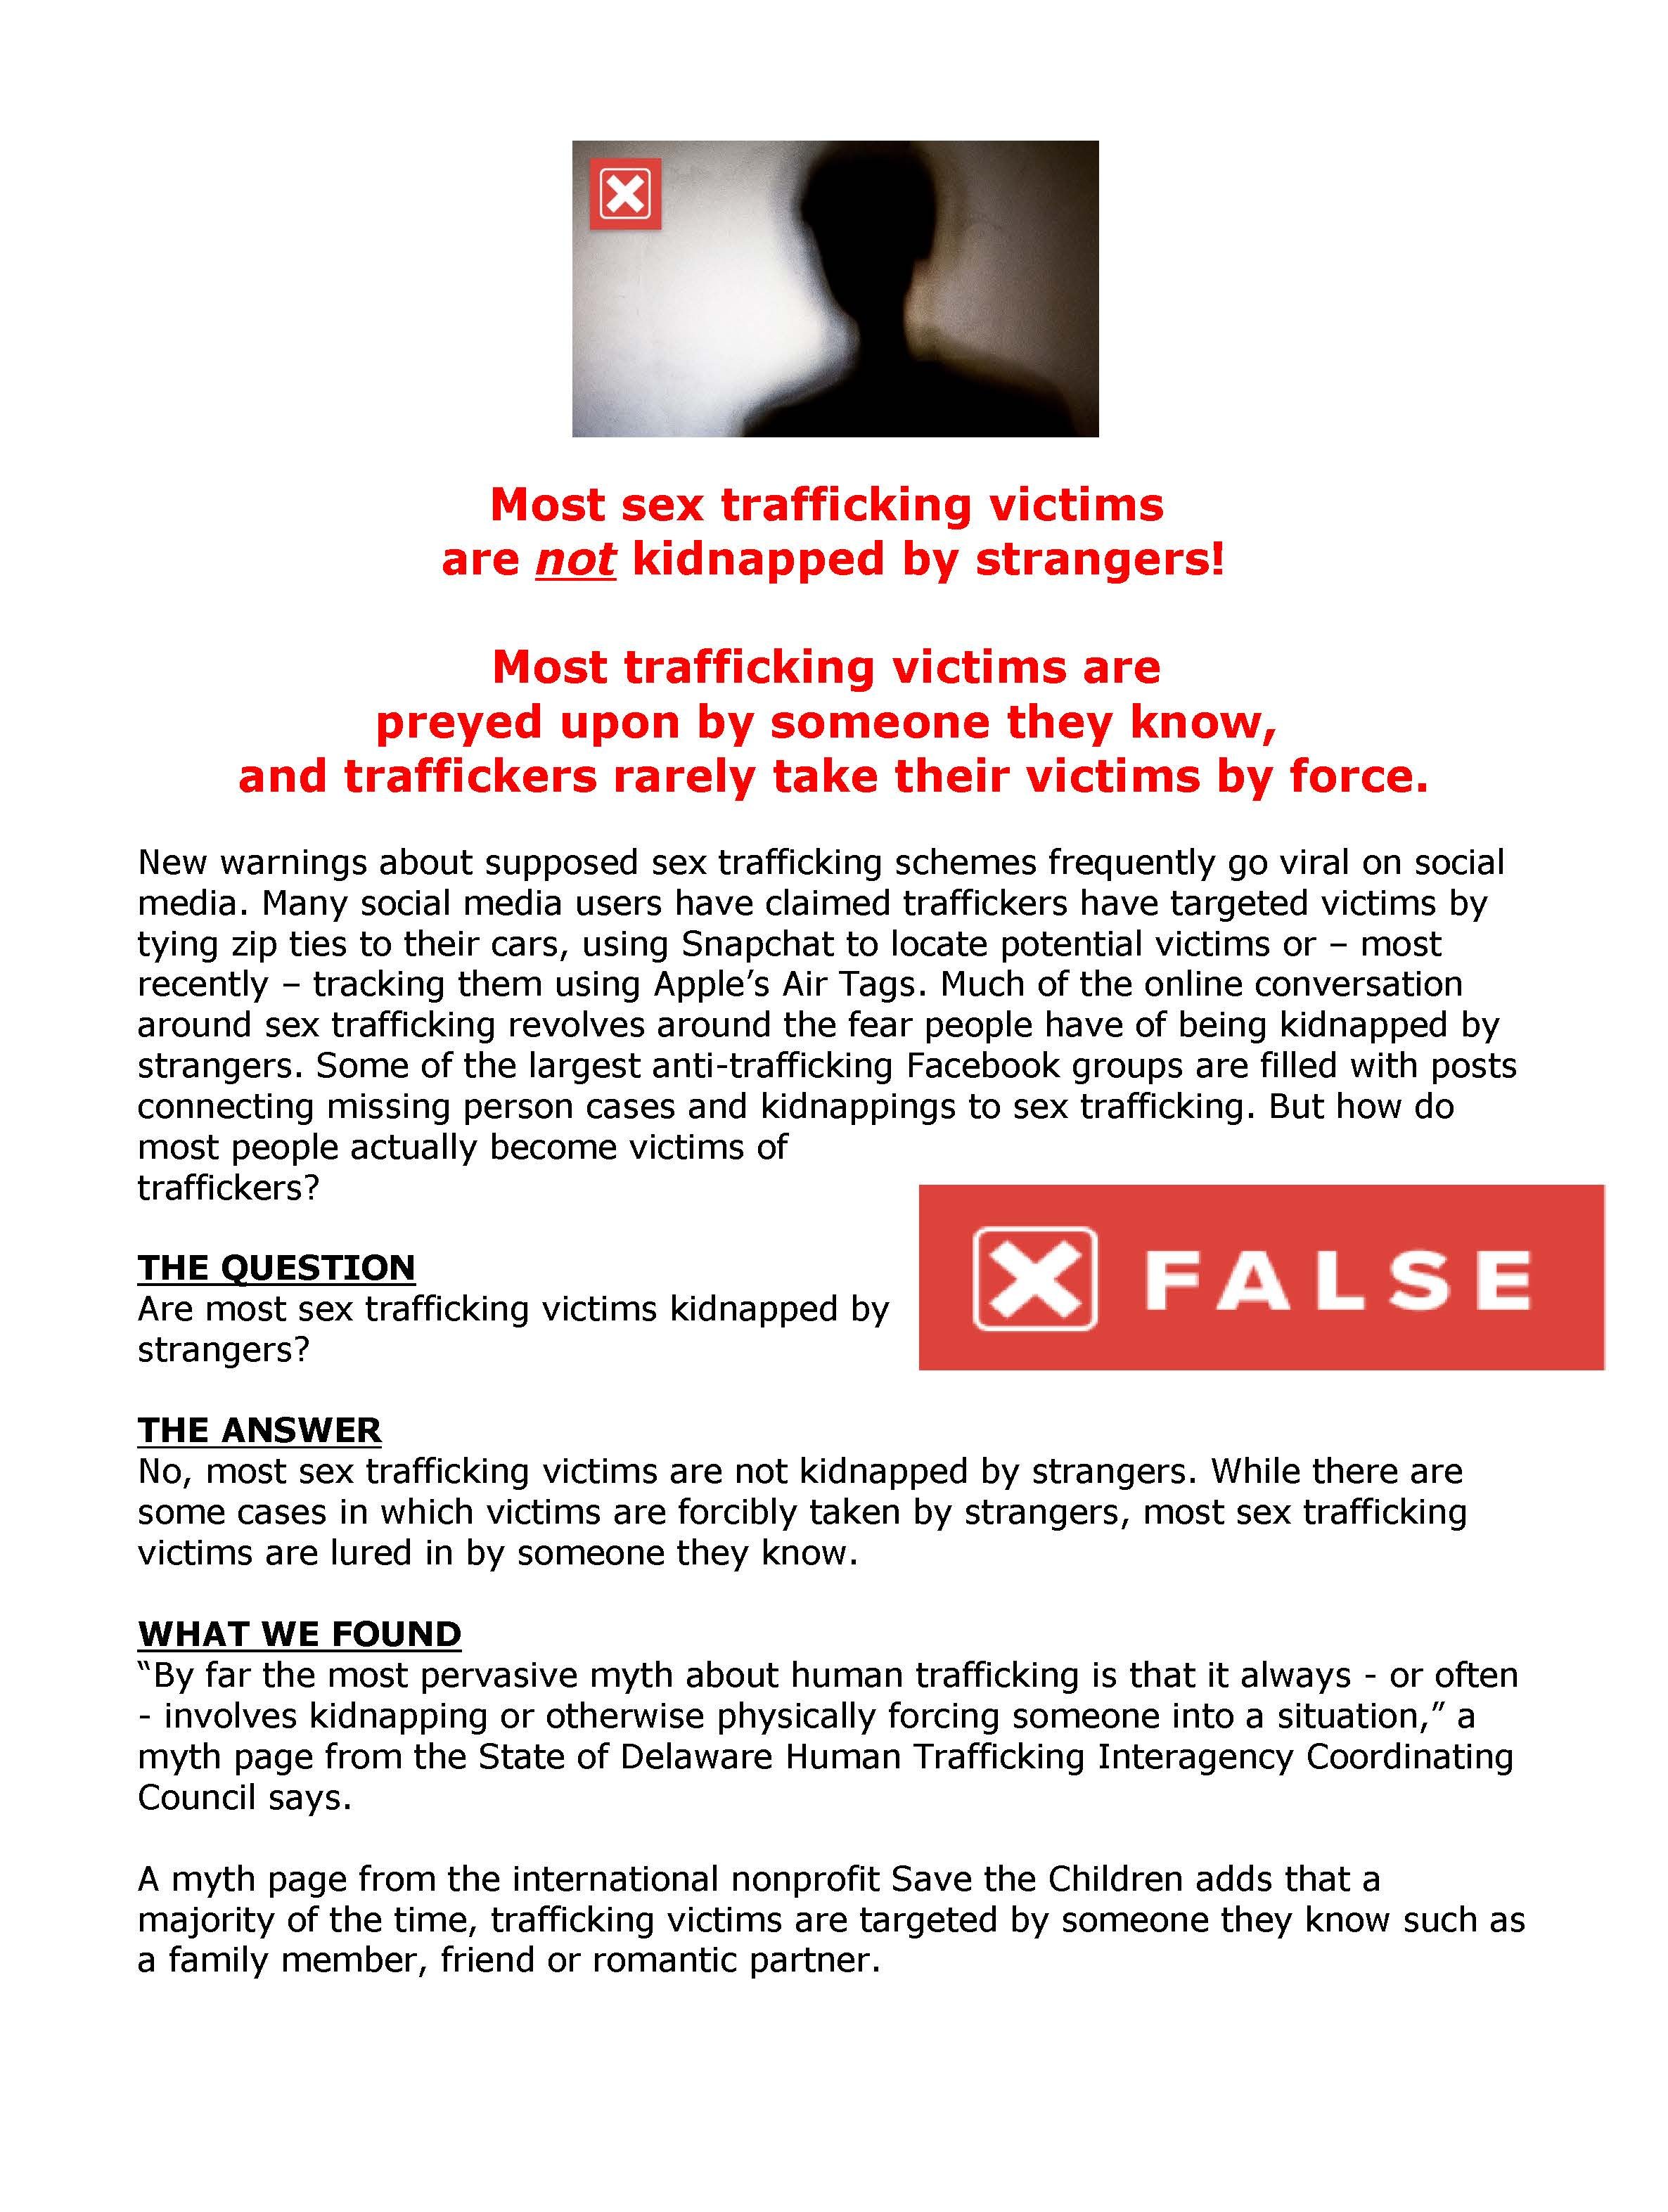 Most sex trafficking victims are not kidnapped by strangers_Page_1.jpg